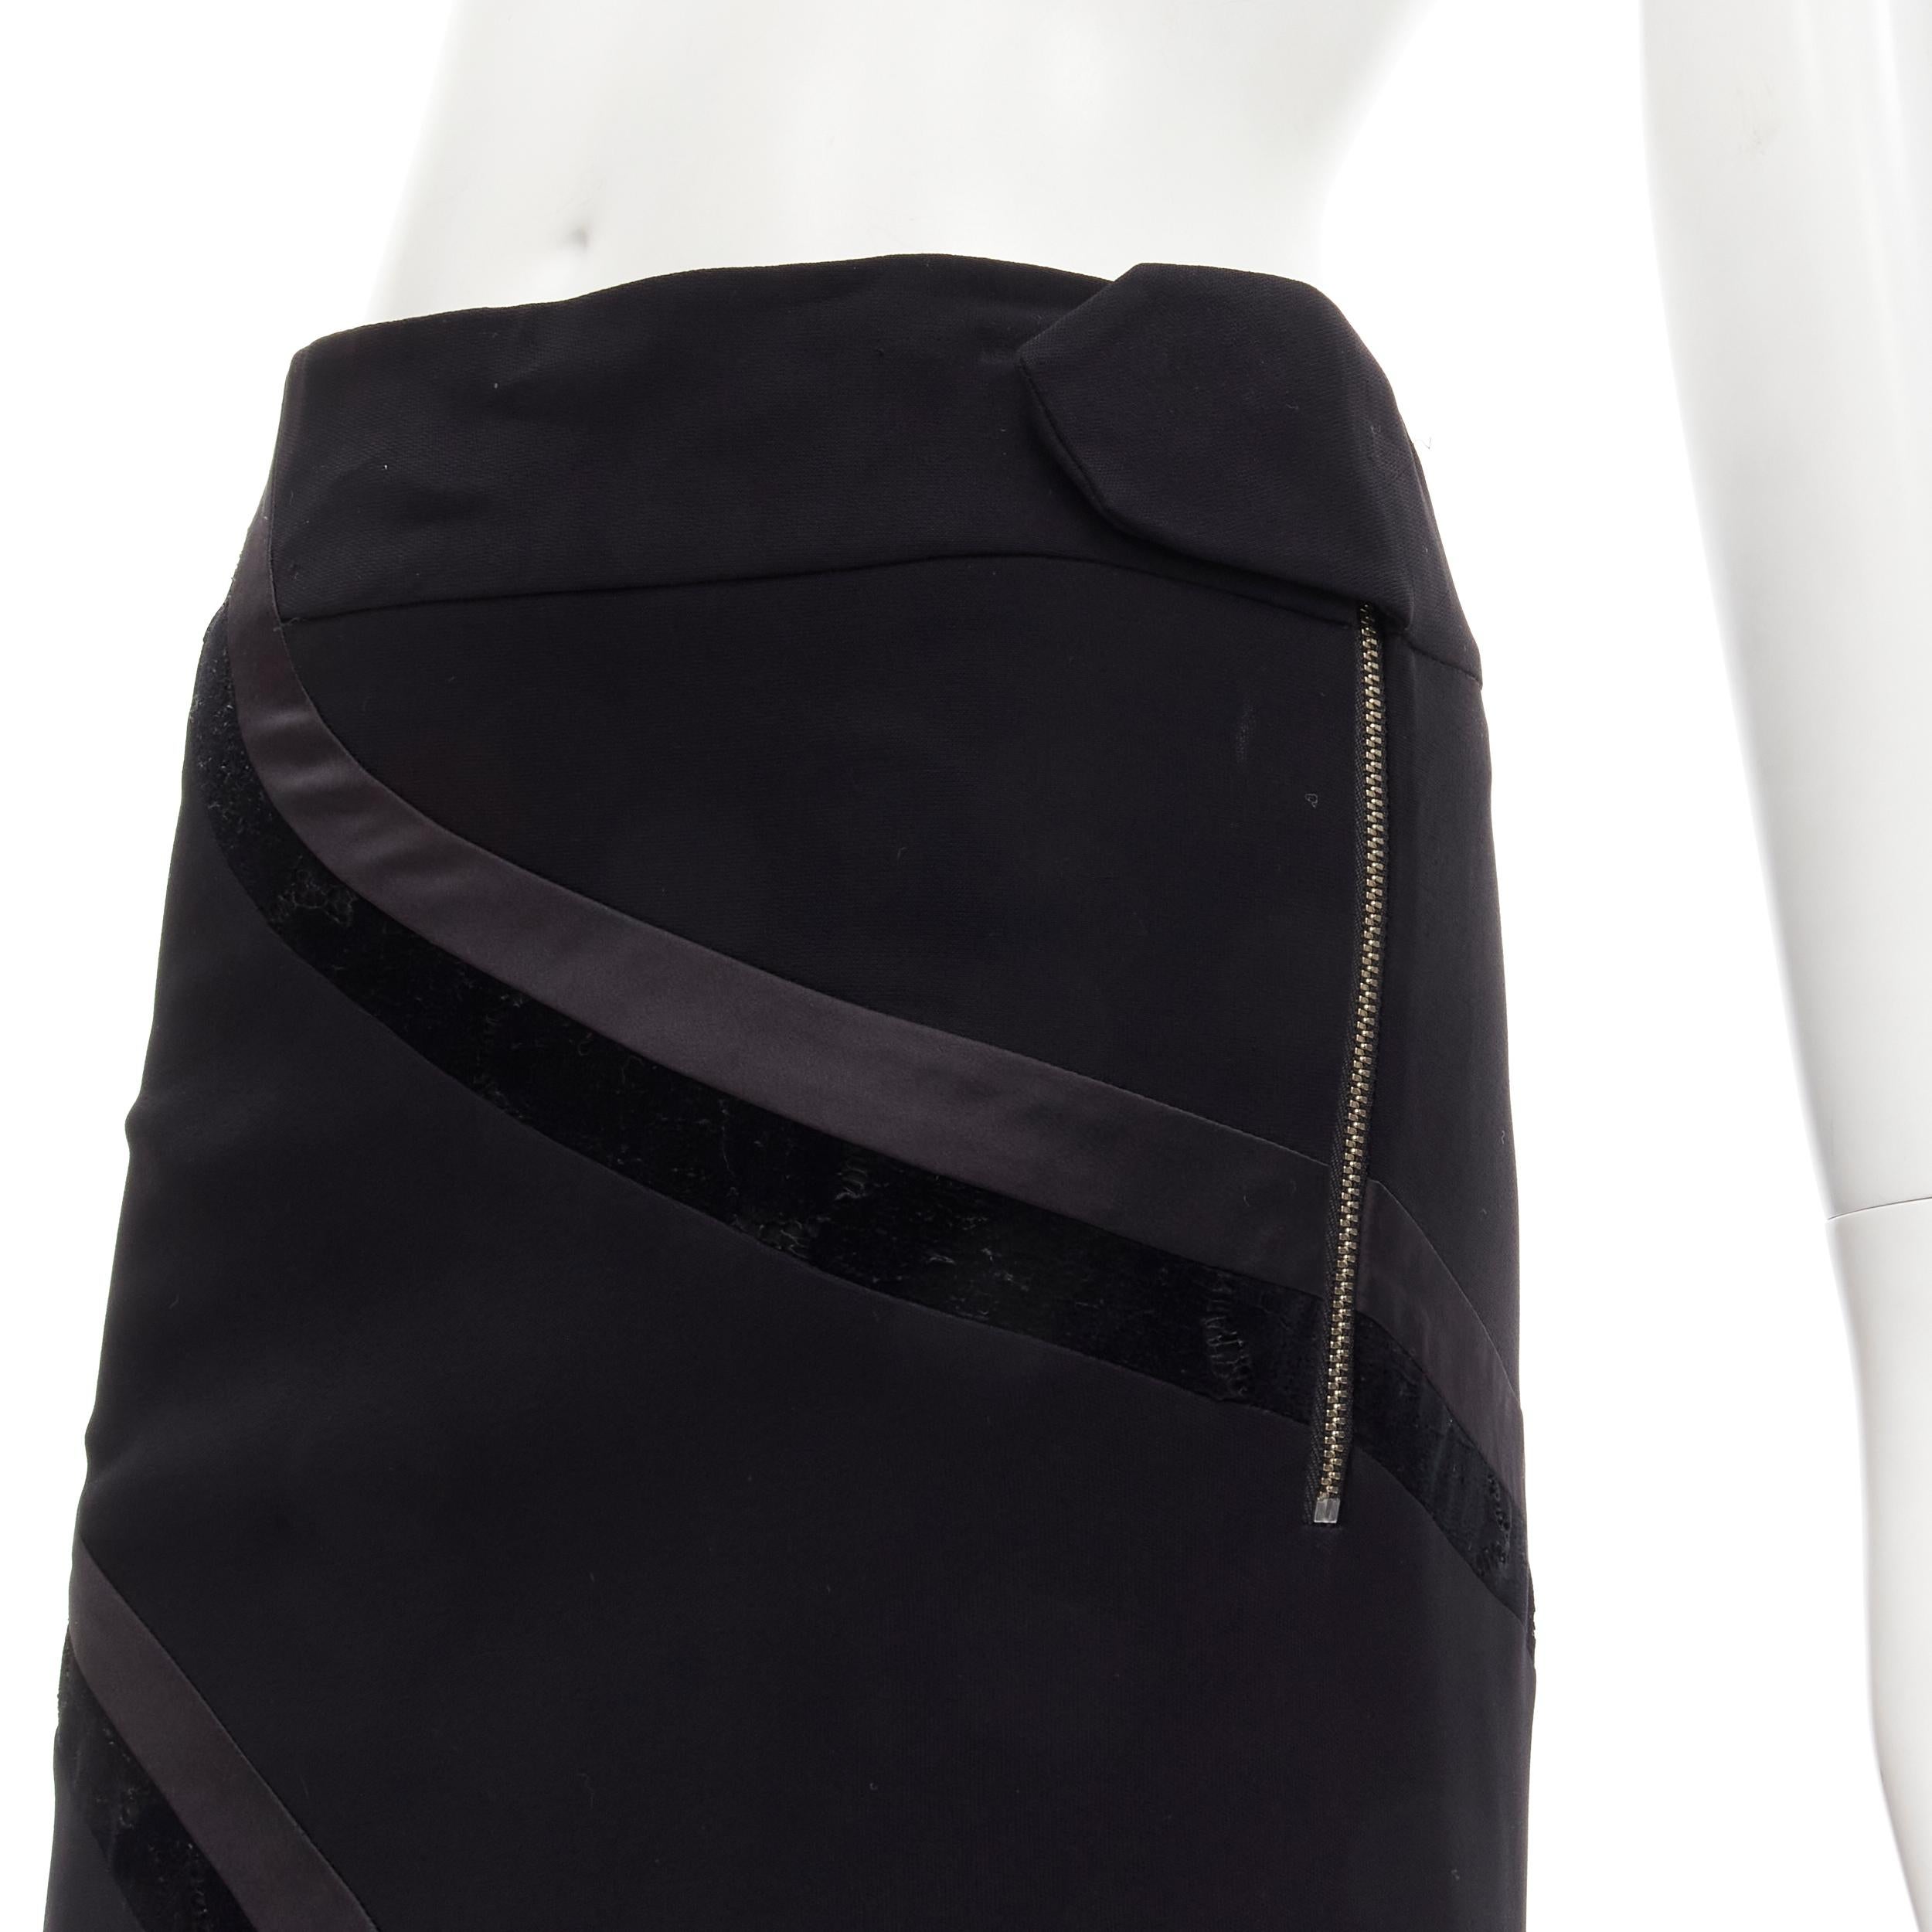 RHIE black velvet spiral trim flared midi skirt US4 S
Brand: Rhie
Extra Detail: Concealed snap button tab with zip closure

CONDITION:
Condition: Excellent, this item was pre-owned and is in excellent condition. 

SIZING:
Designer Size: US